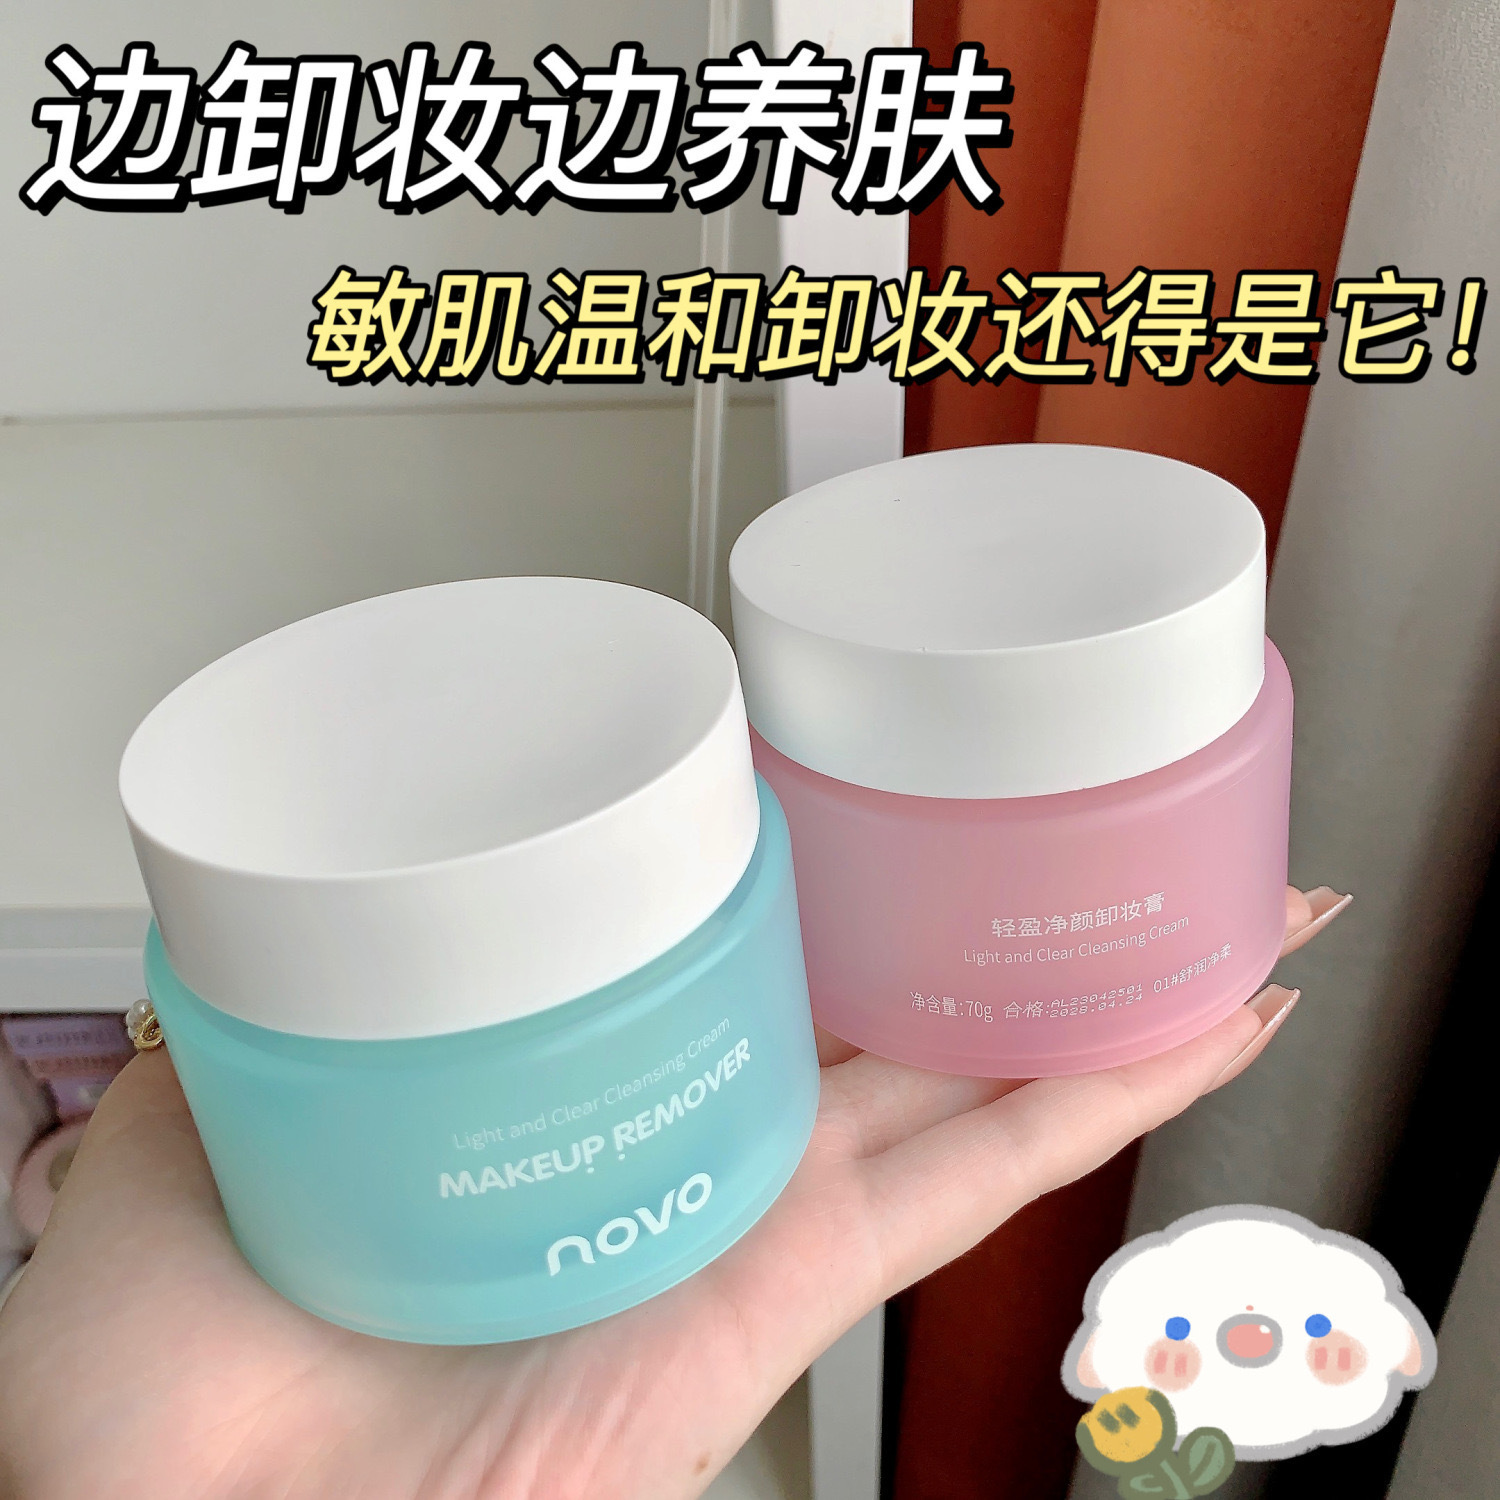 makeup novo light cleansing cleansing cream mild non-irritating deep cleansing eye， lip and face make-up removing lotion cleansing water